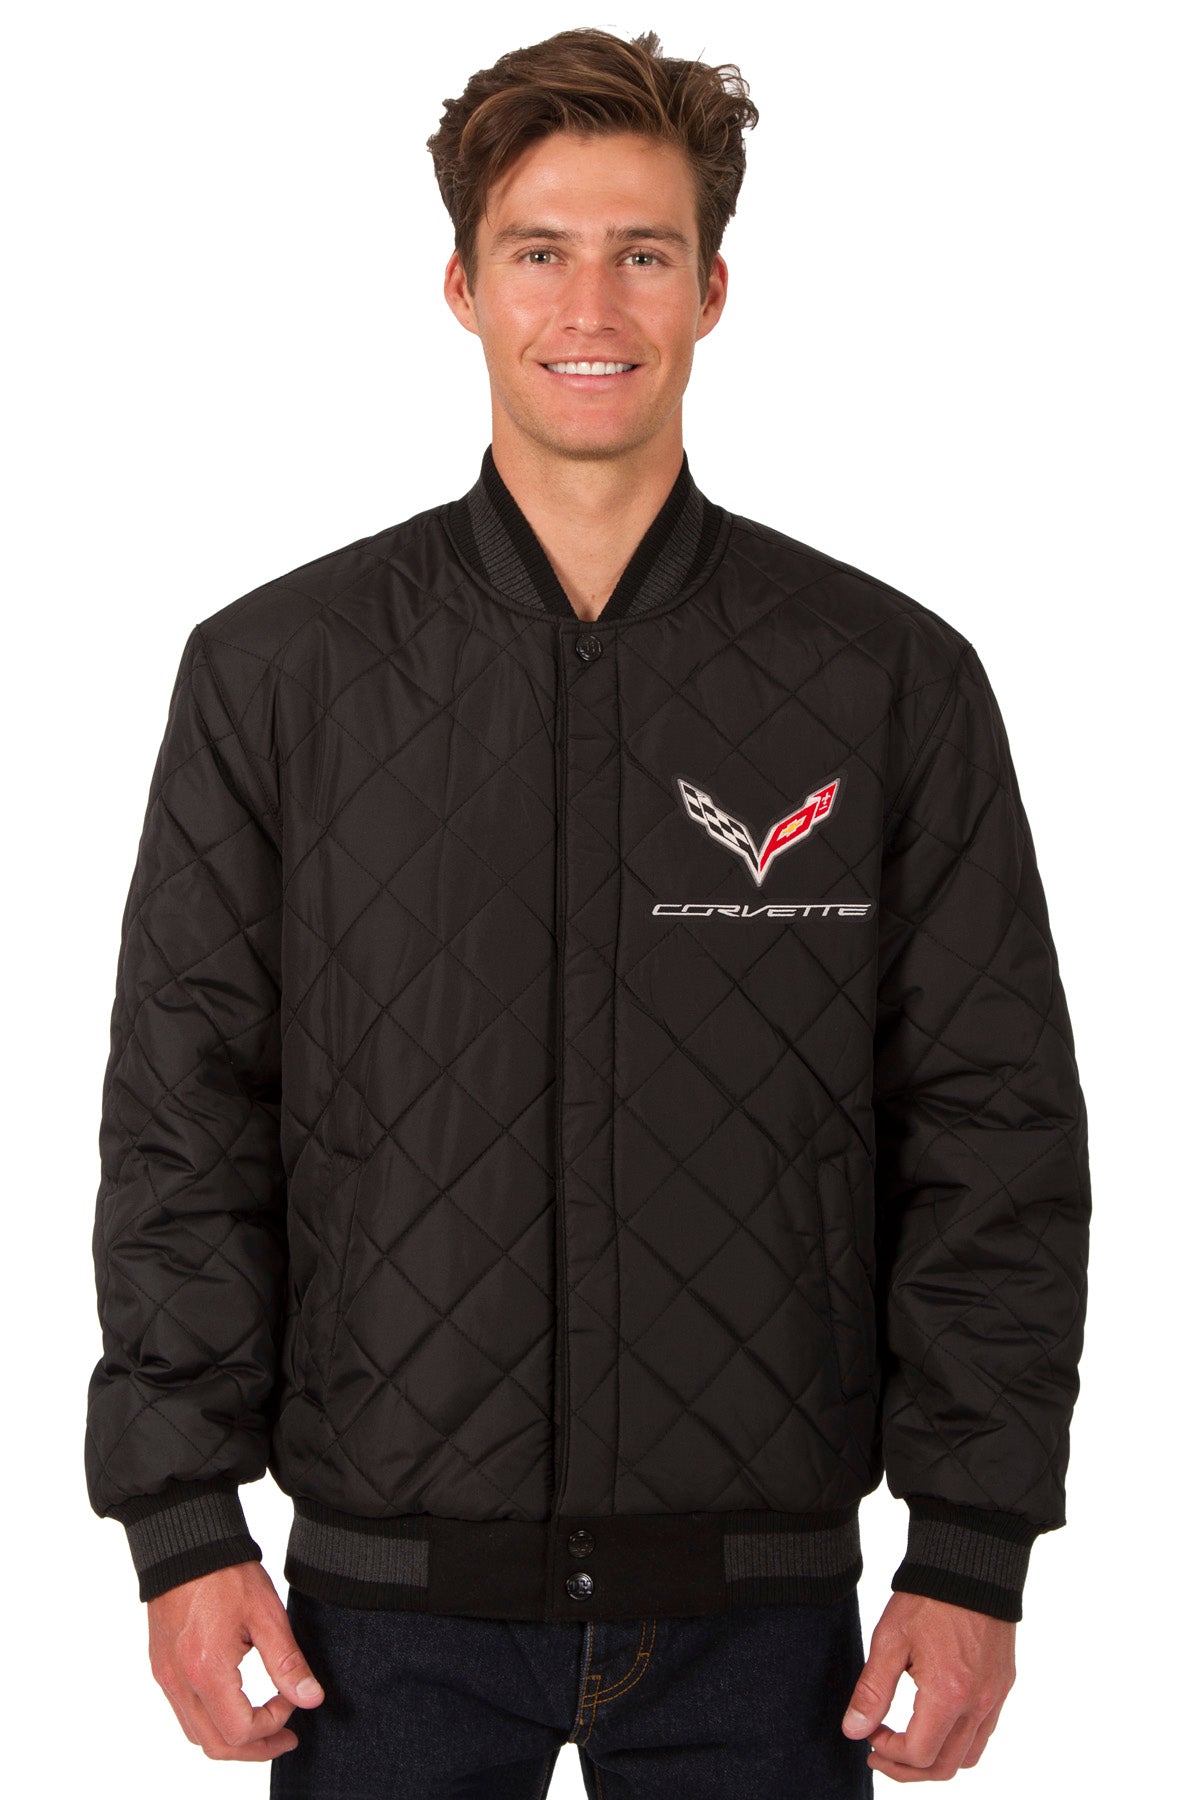 Corvette Reversible Wool and Leather Jacket